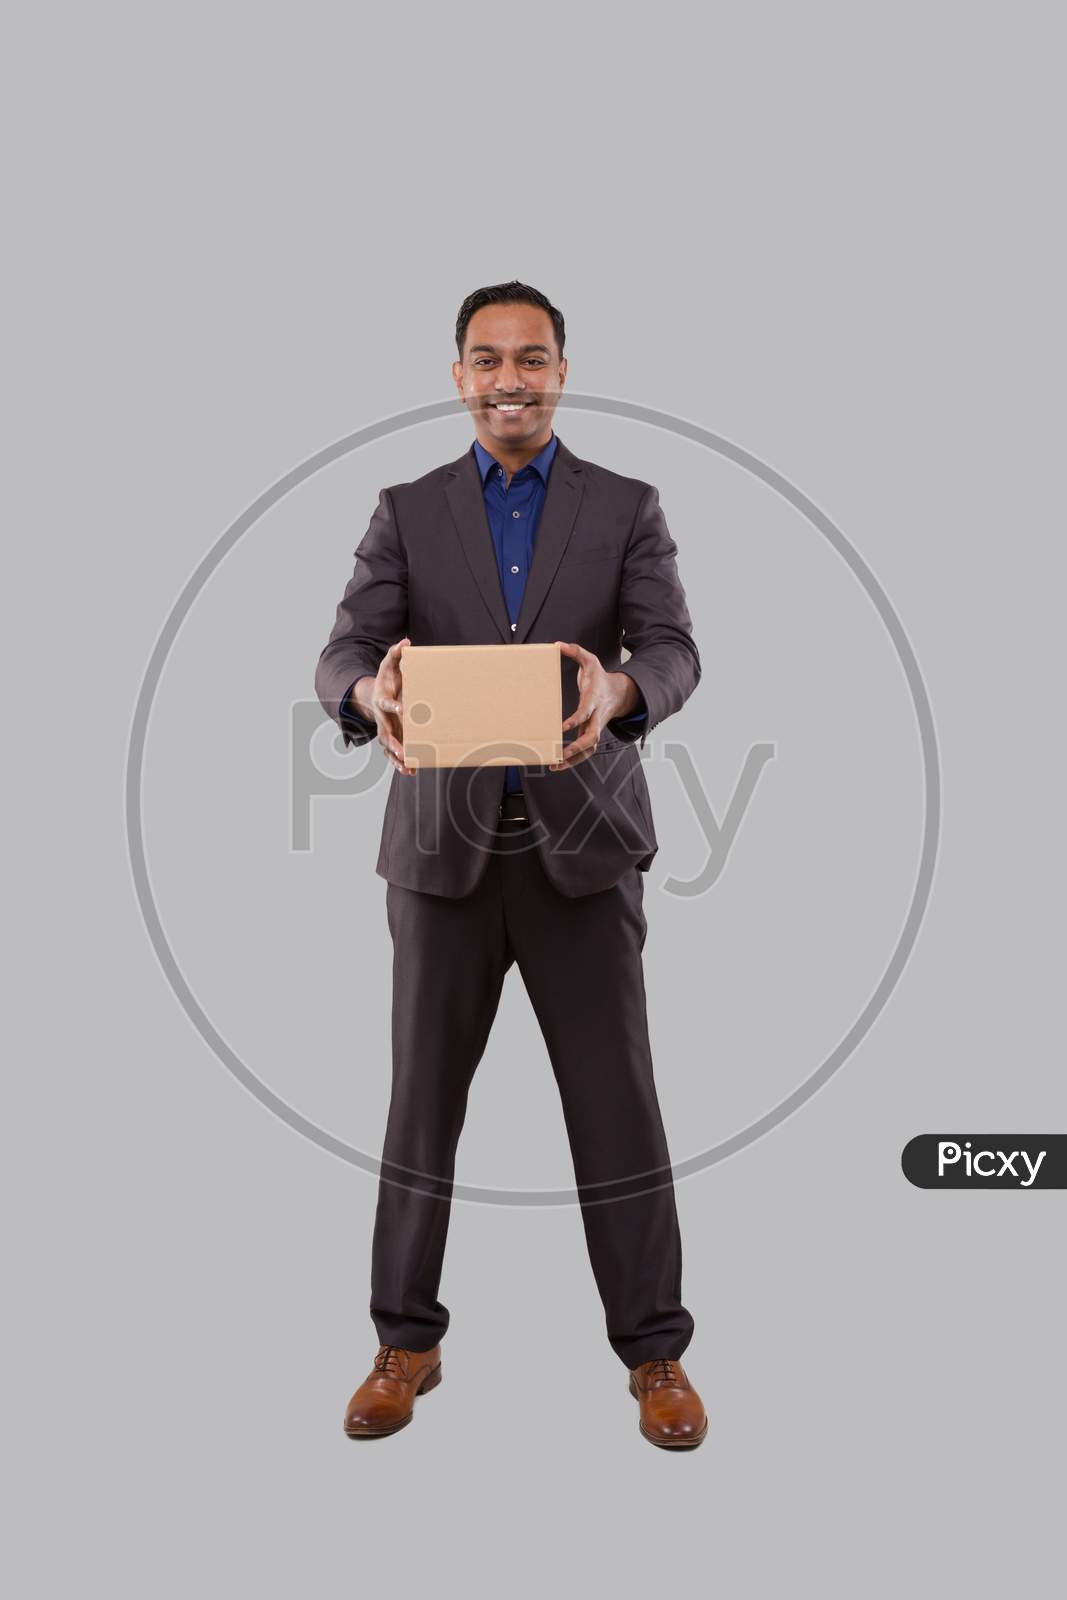 Businessman Holding Carton Box In Hands. Indian Business Man With Parcel In Hands.